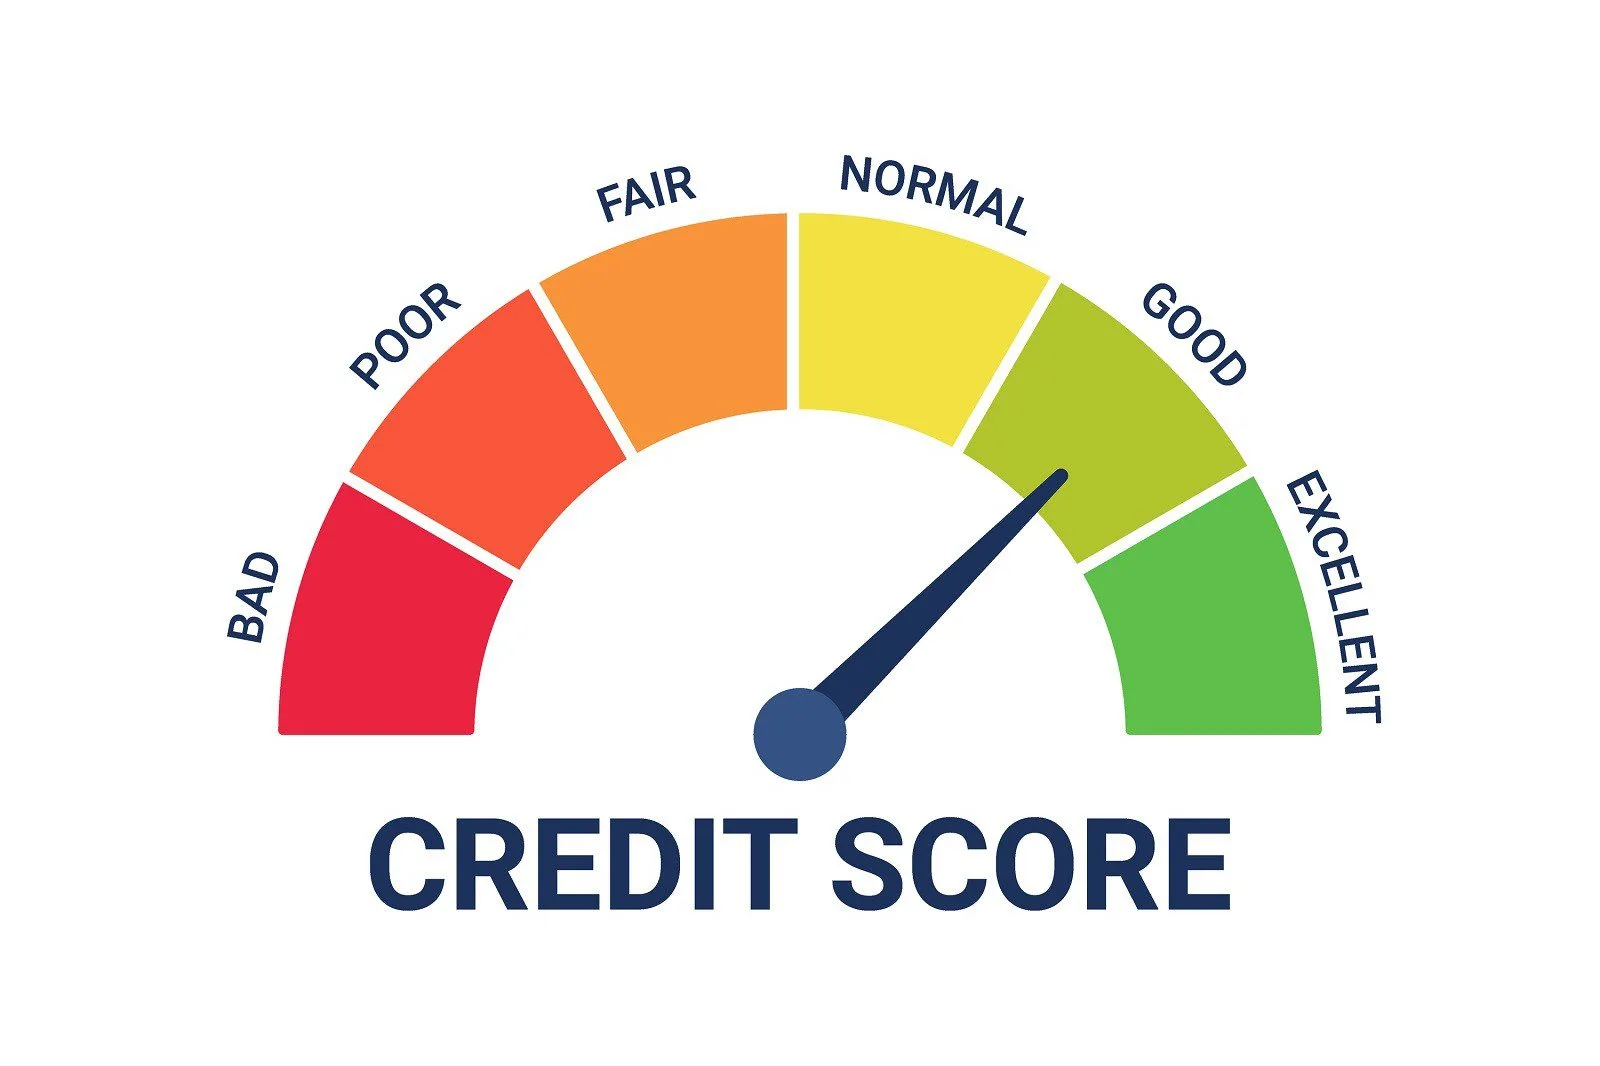 What is a Good Credit Score to buy a house